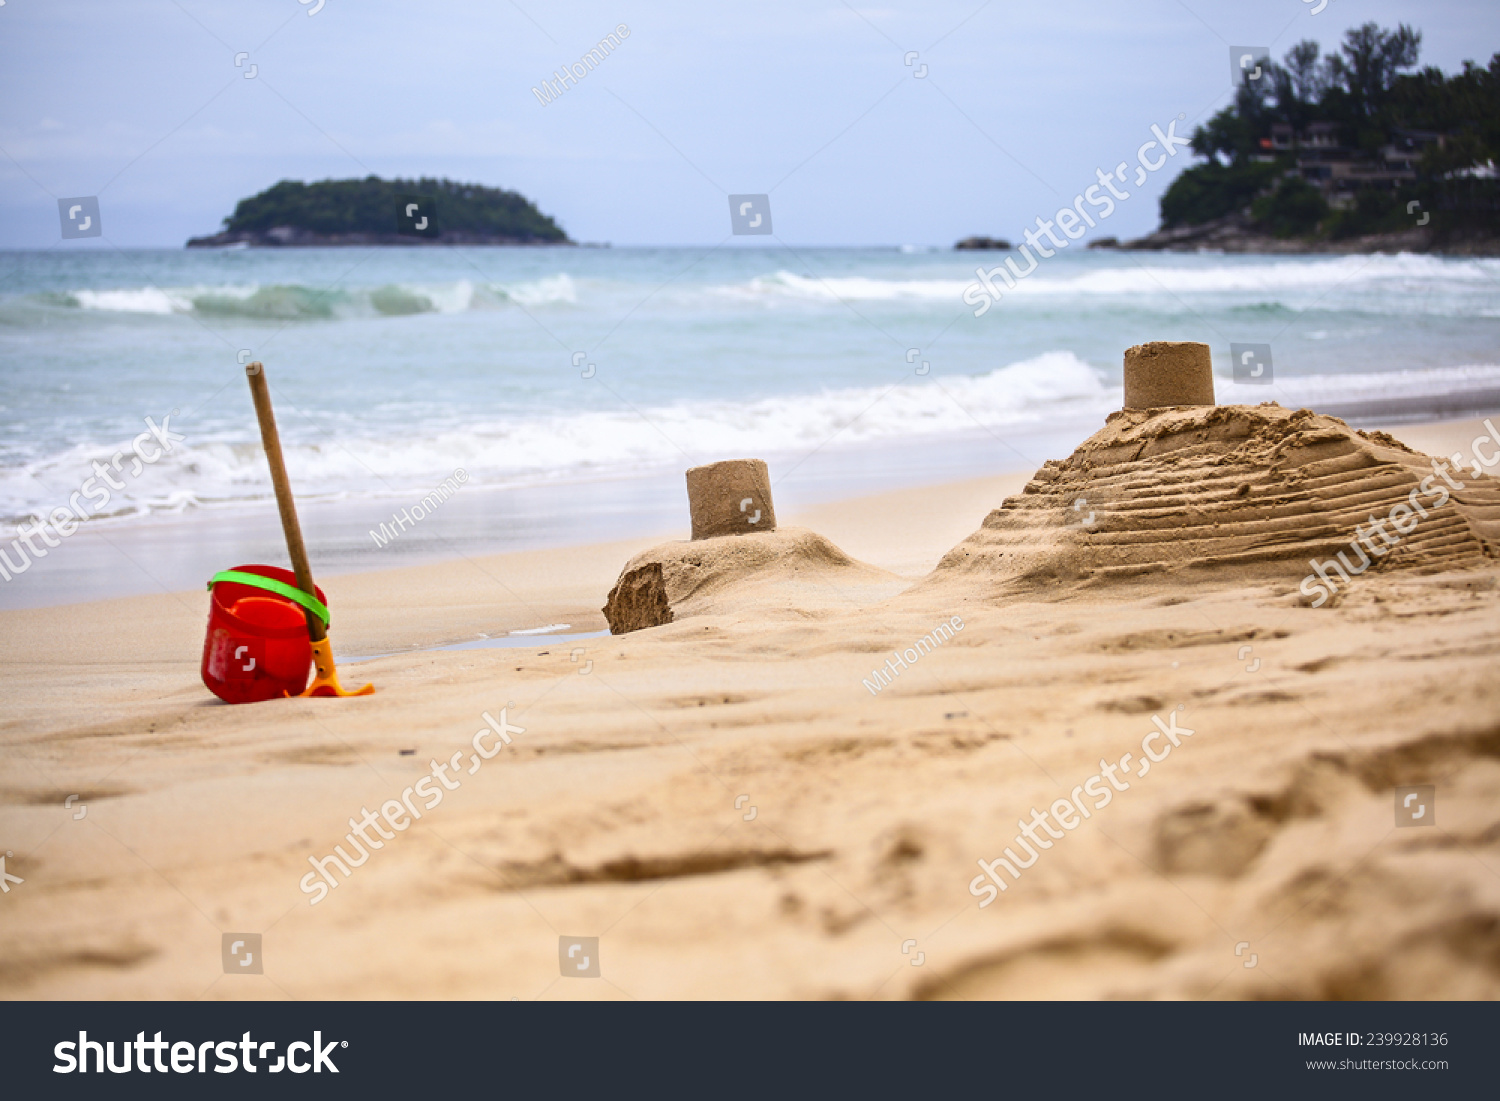 Sand castles made by children on the background of the sea #239928136